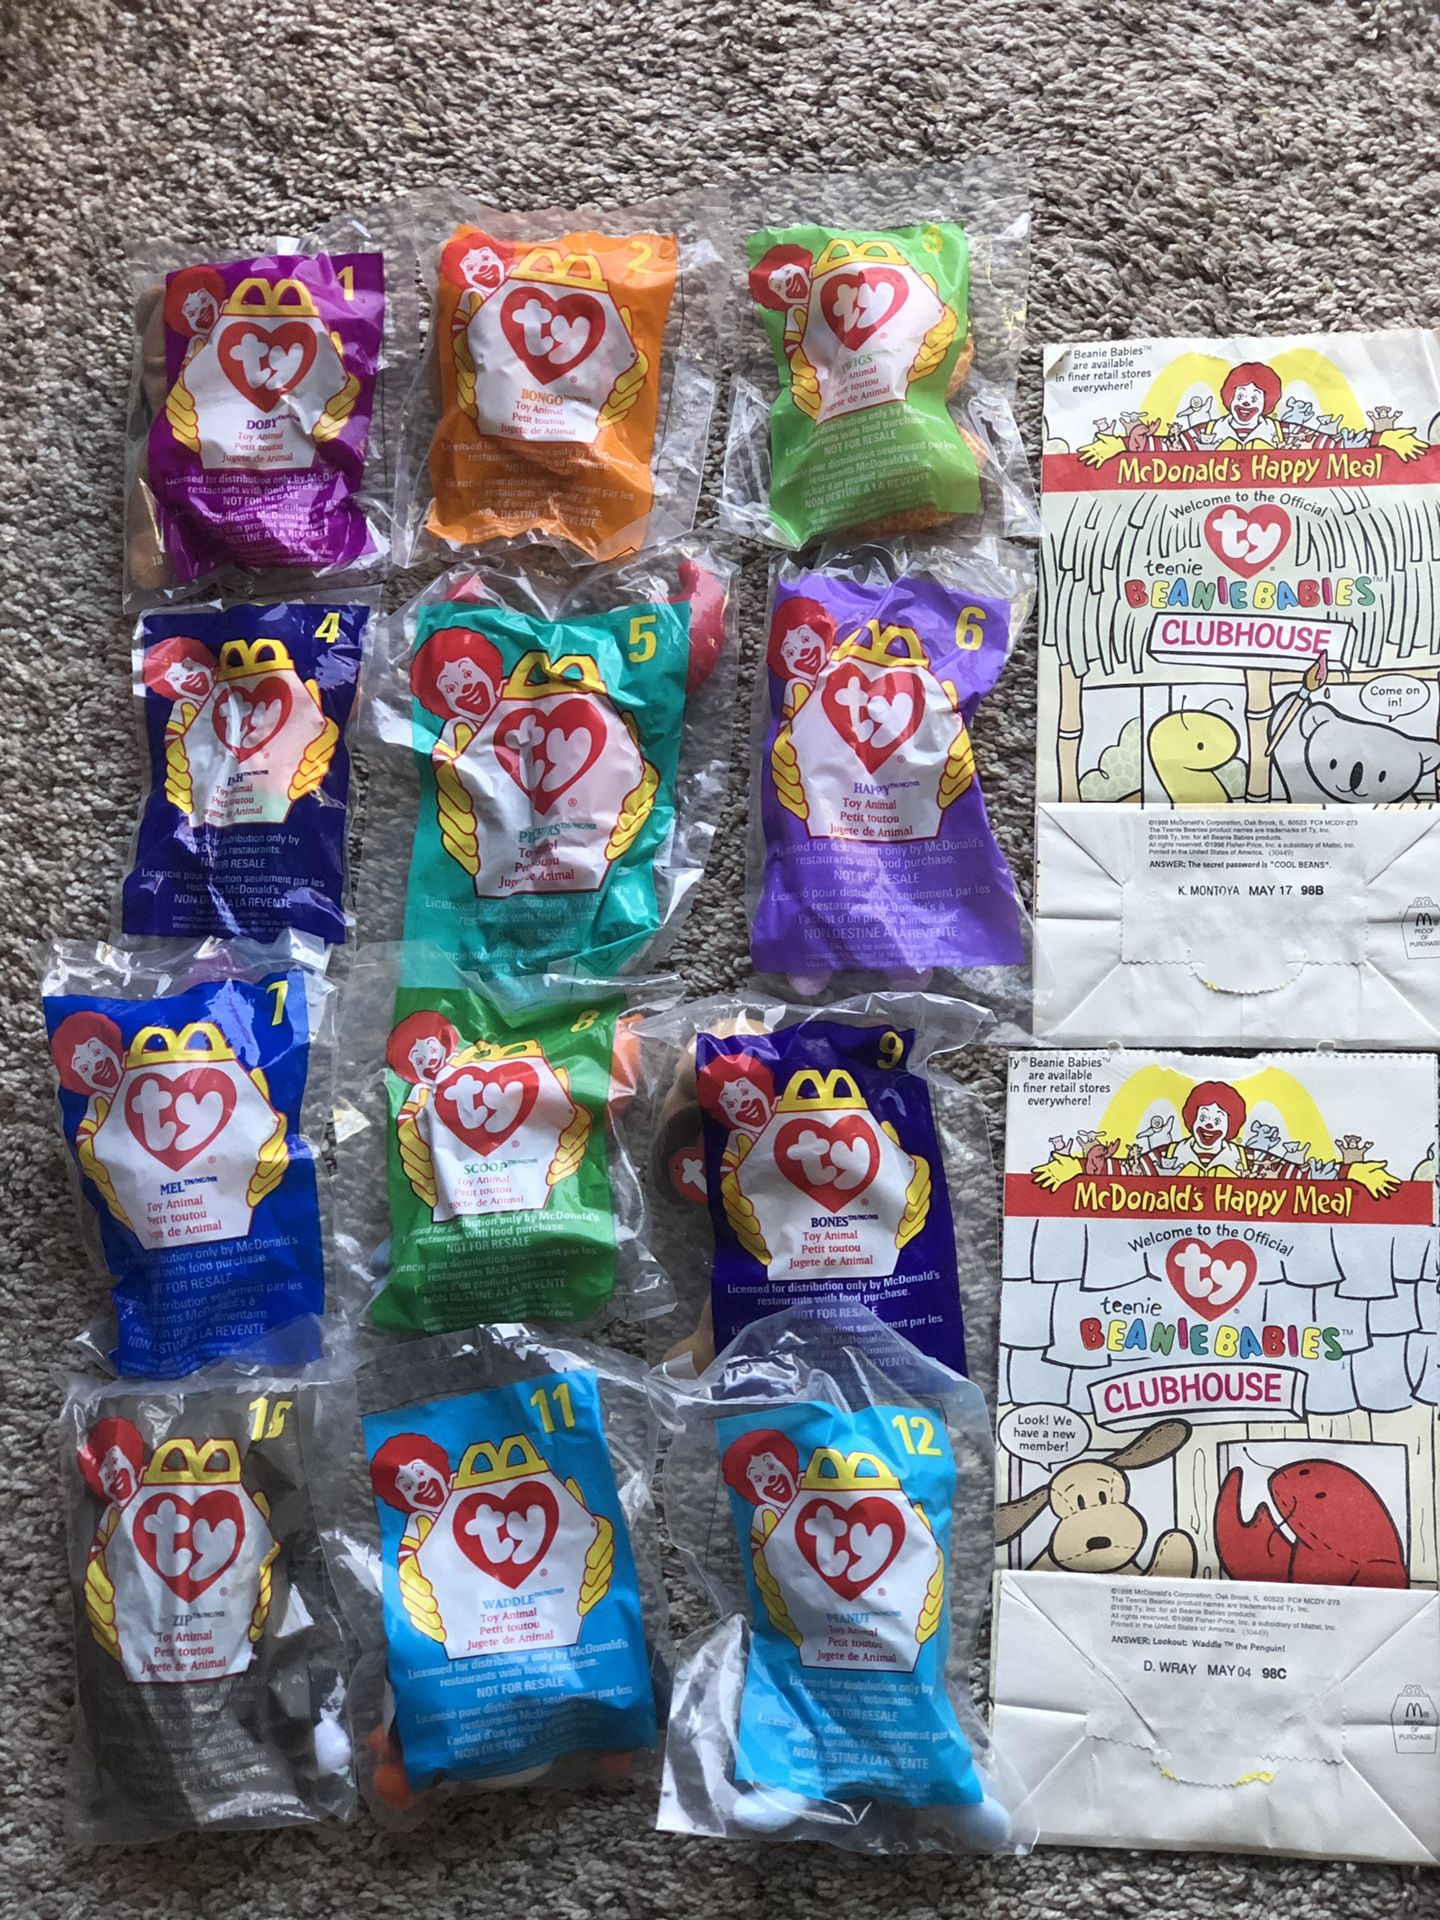 1998 MCDONALDS TY TEENIE BEANIE BABIES - COMPLETE SET 1-12 IN PACKAGES PLUS 2 HAPPY MEAL BAGS- COLLECTIBLE TOYS